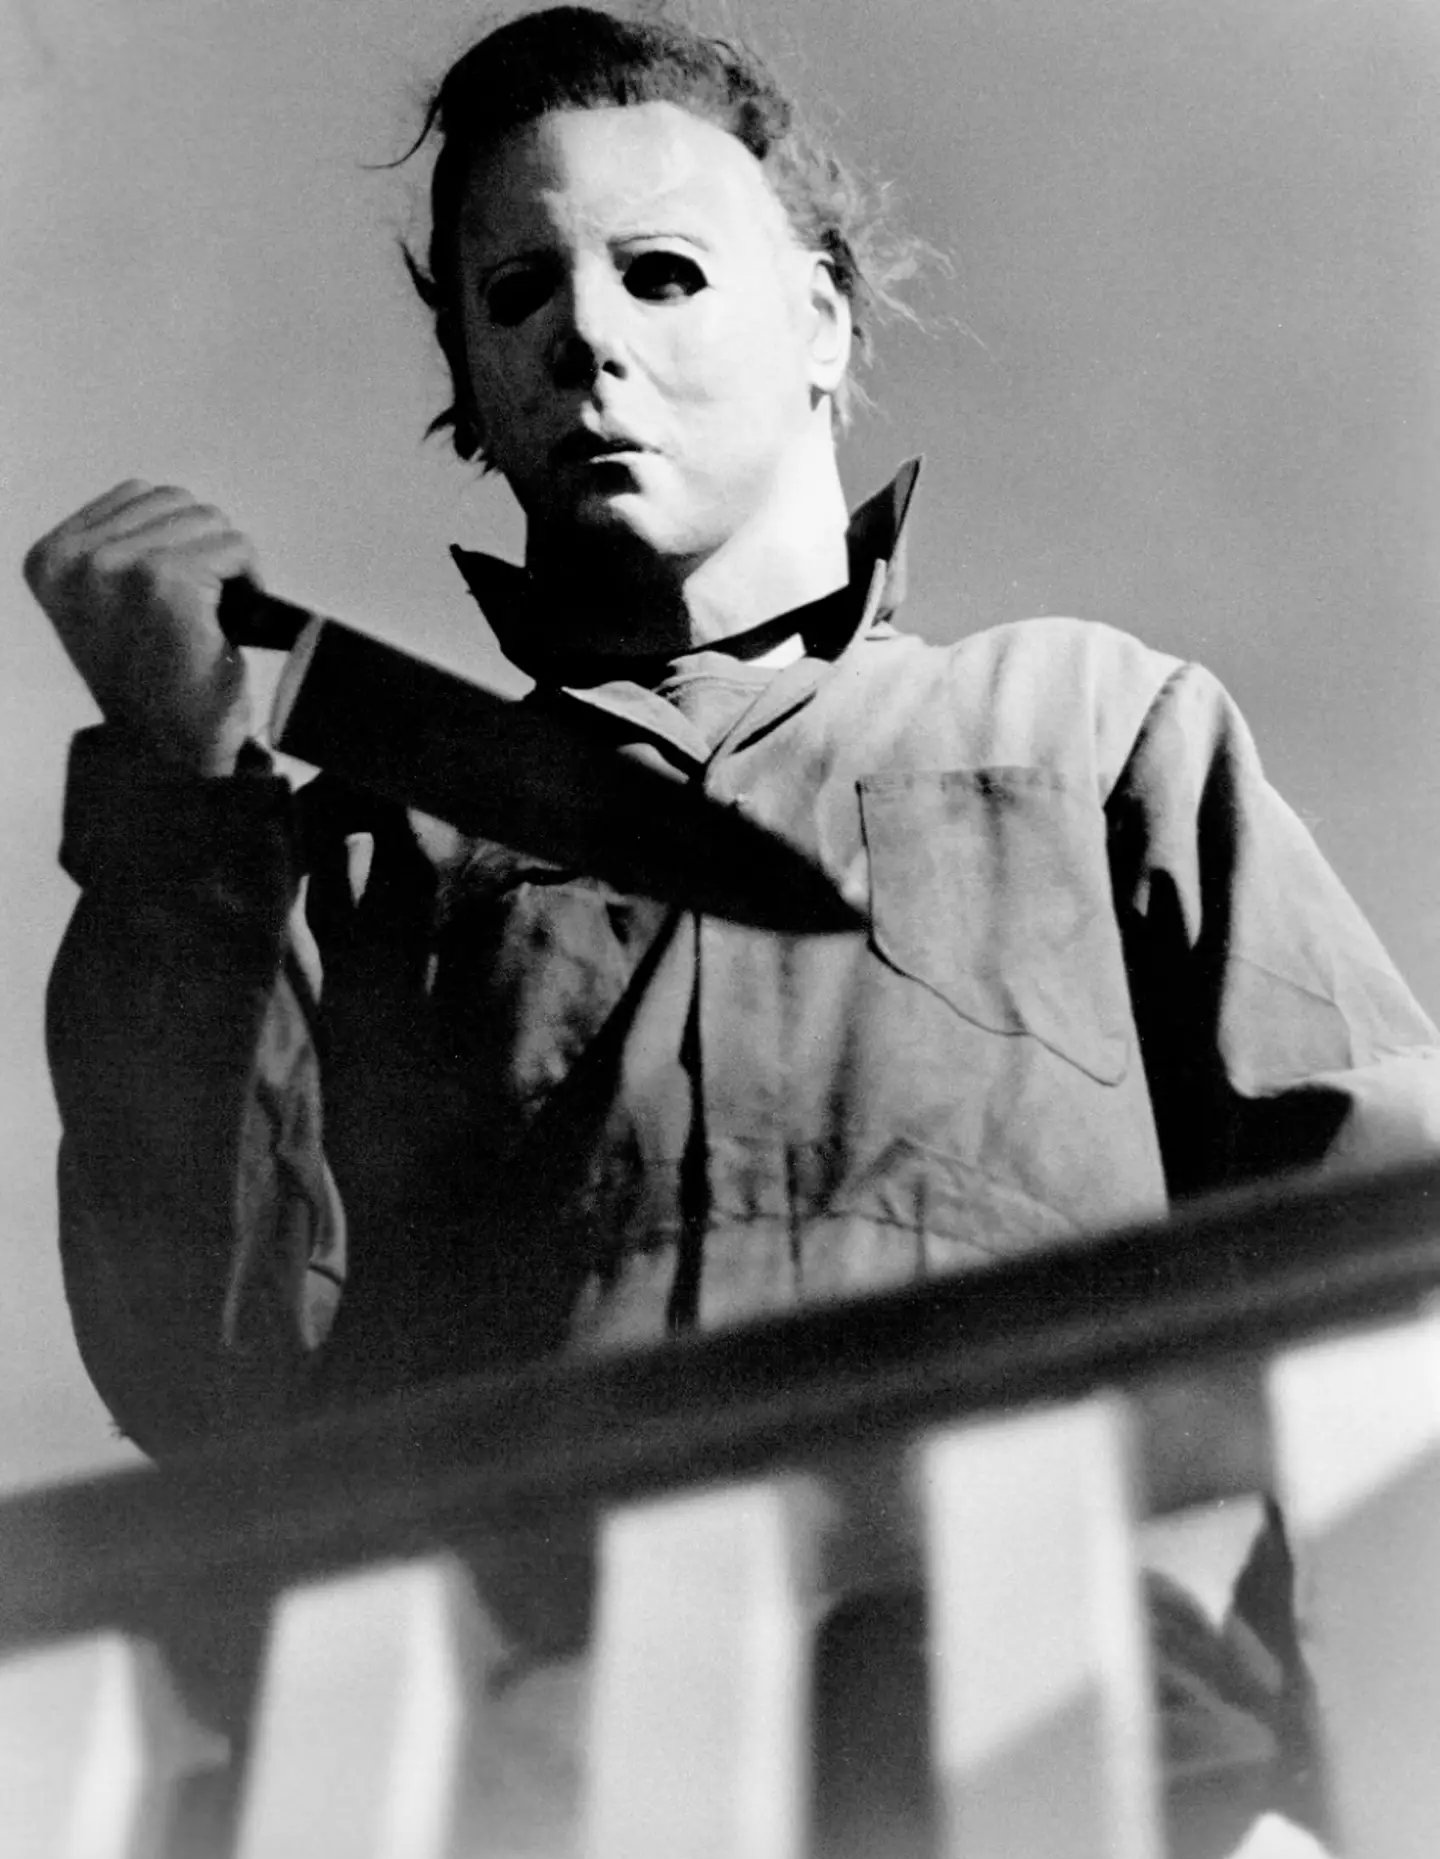 Michael Myers' kill count is at least 160.